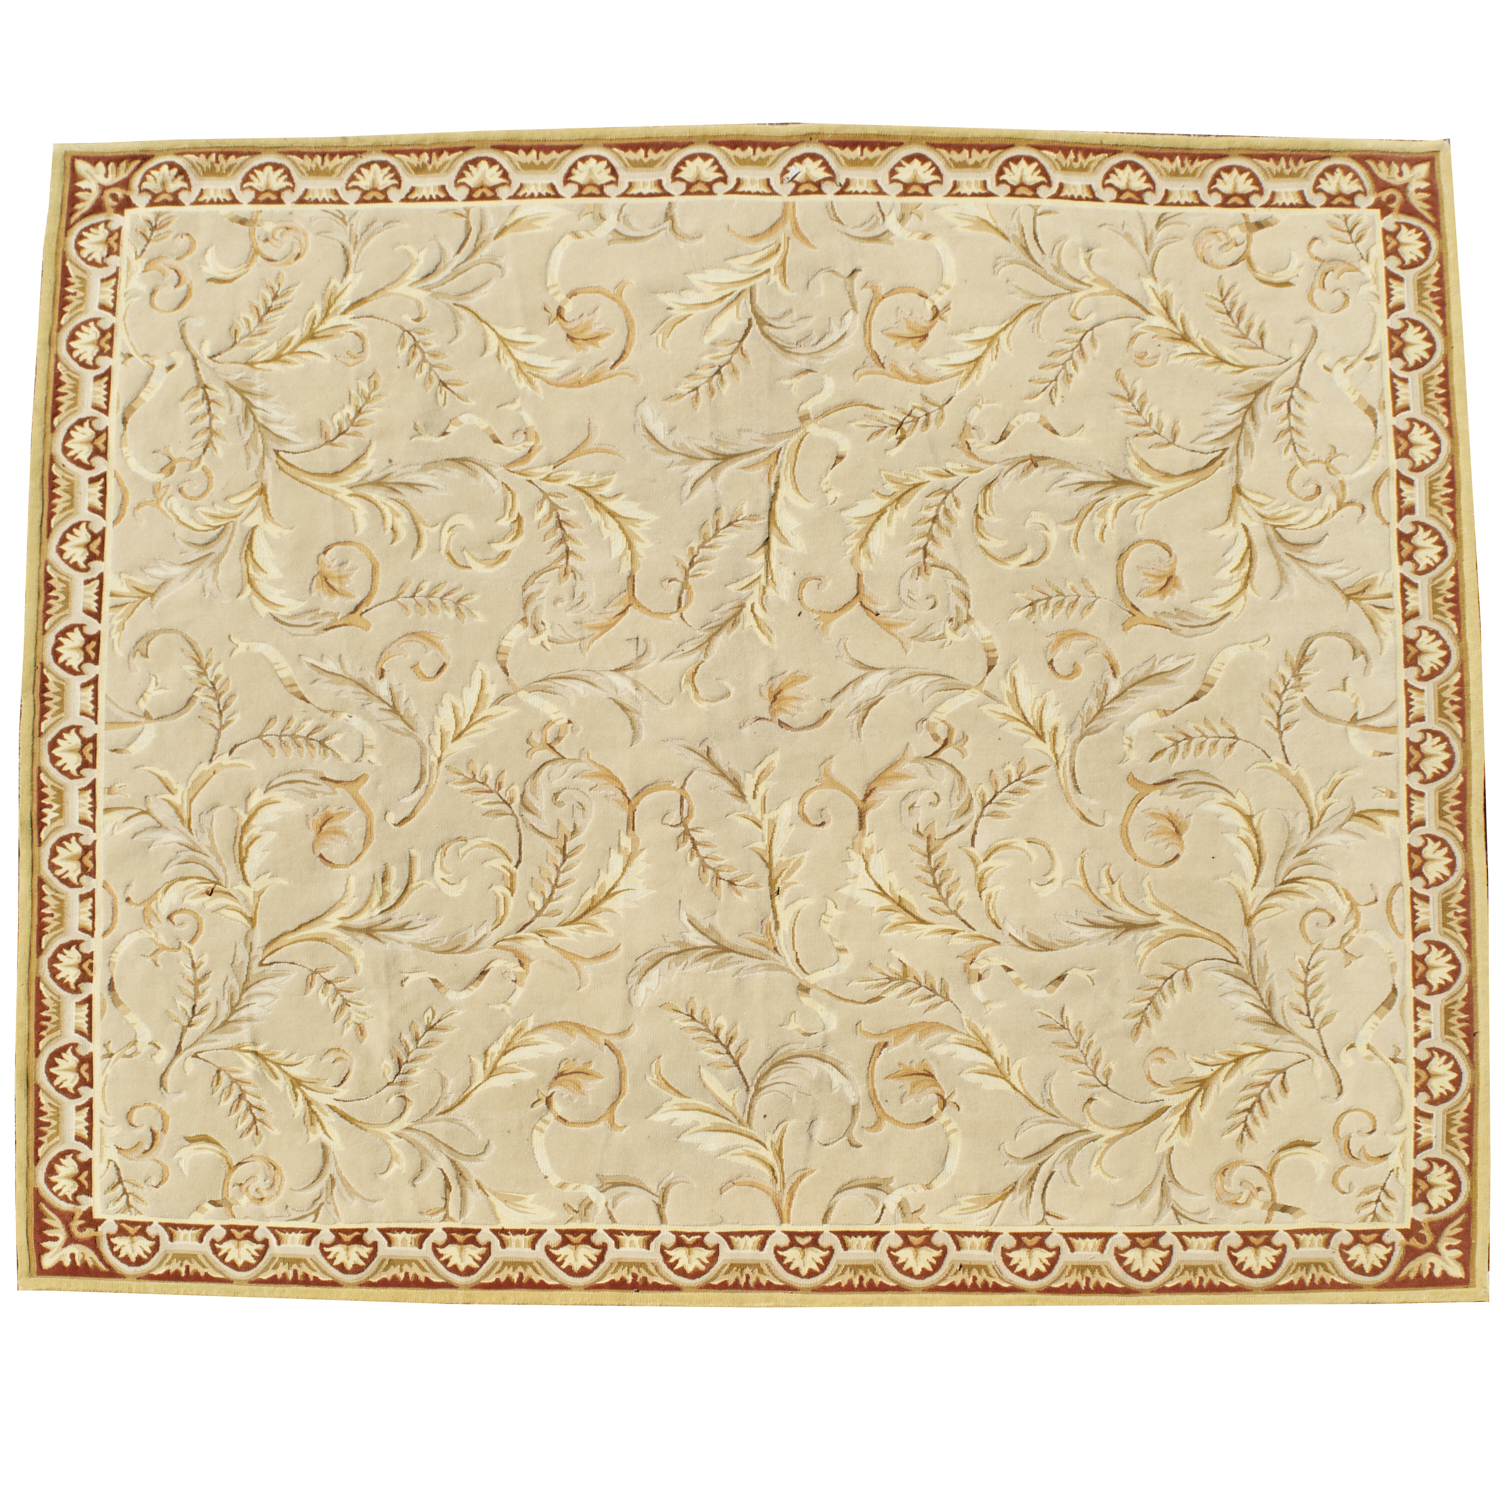 FRENCH TAPESTRY STYLE SCULPTED WOOL